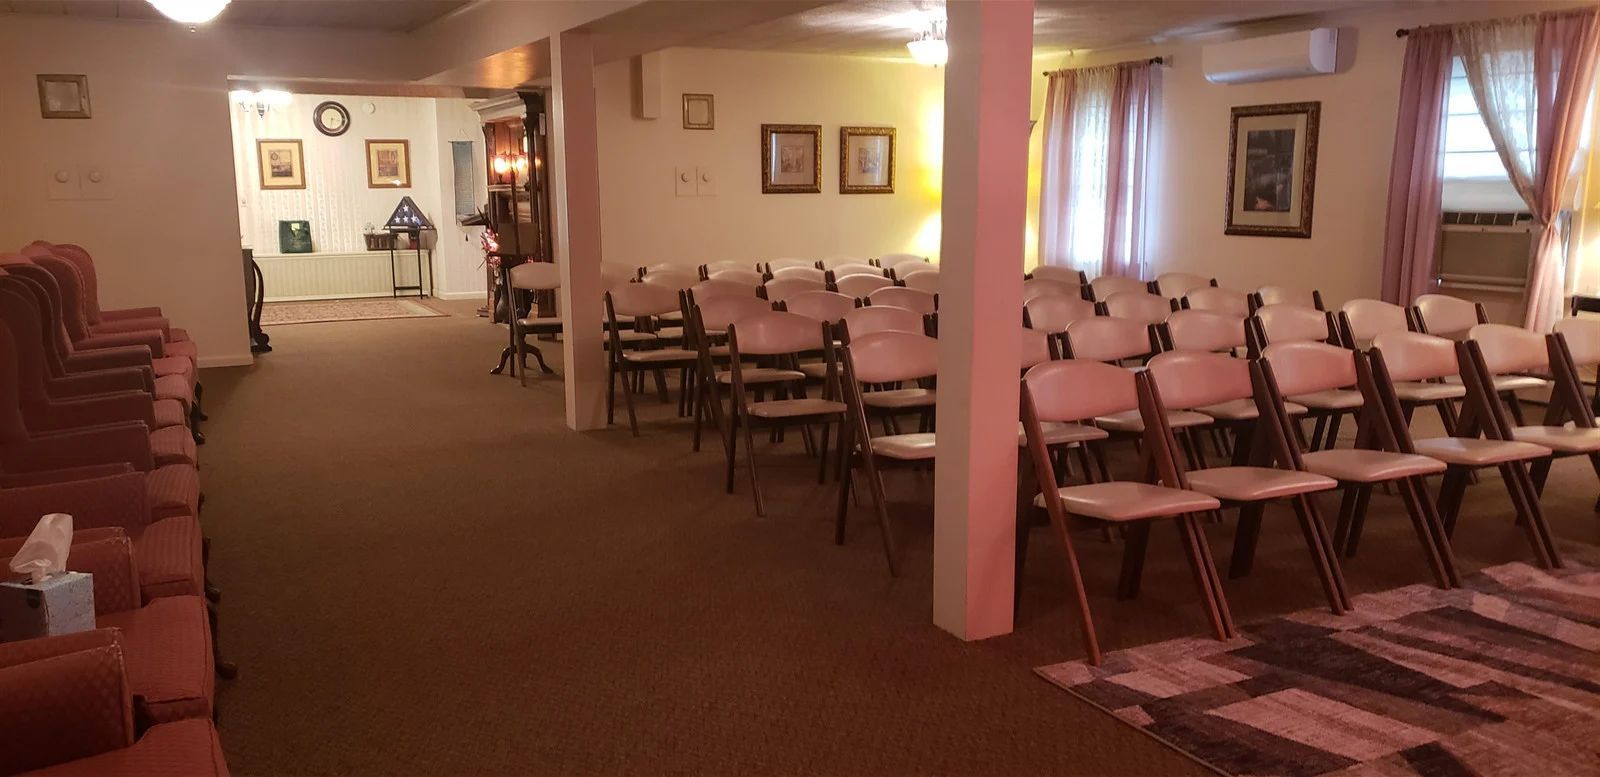 Casey Funeral Home Viewing Room